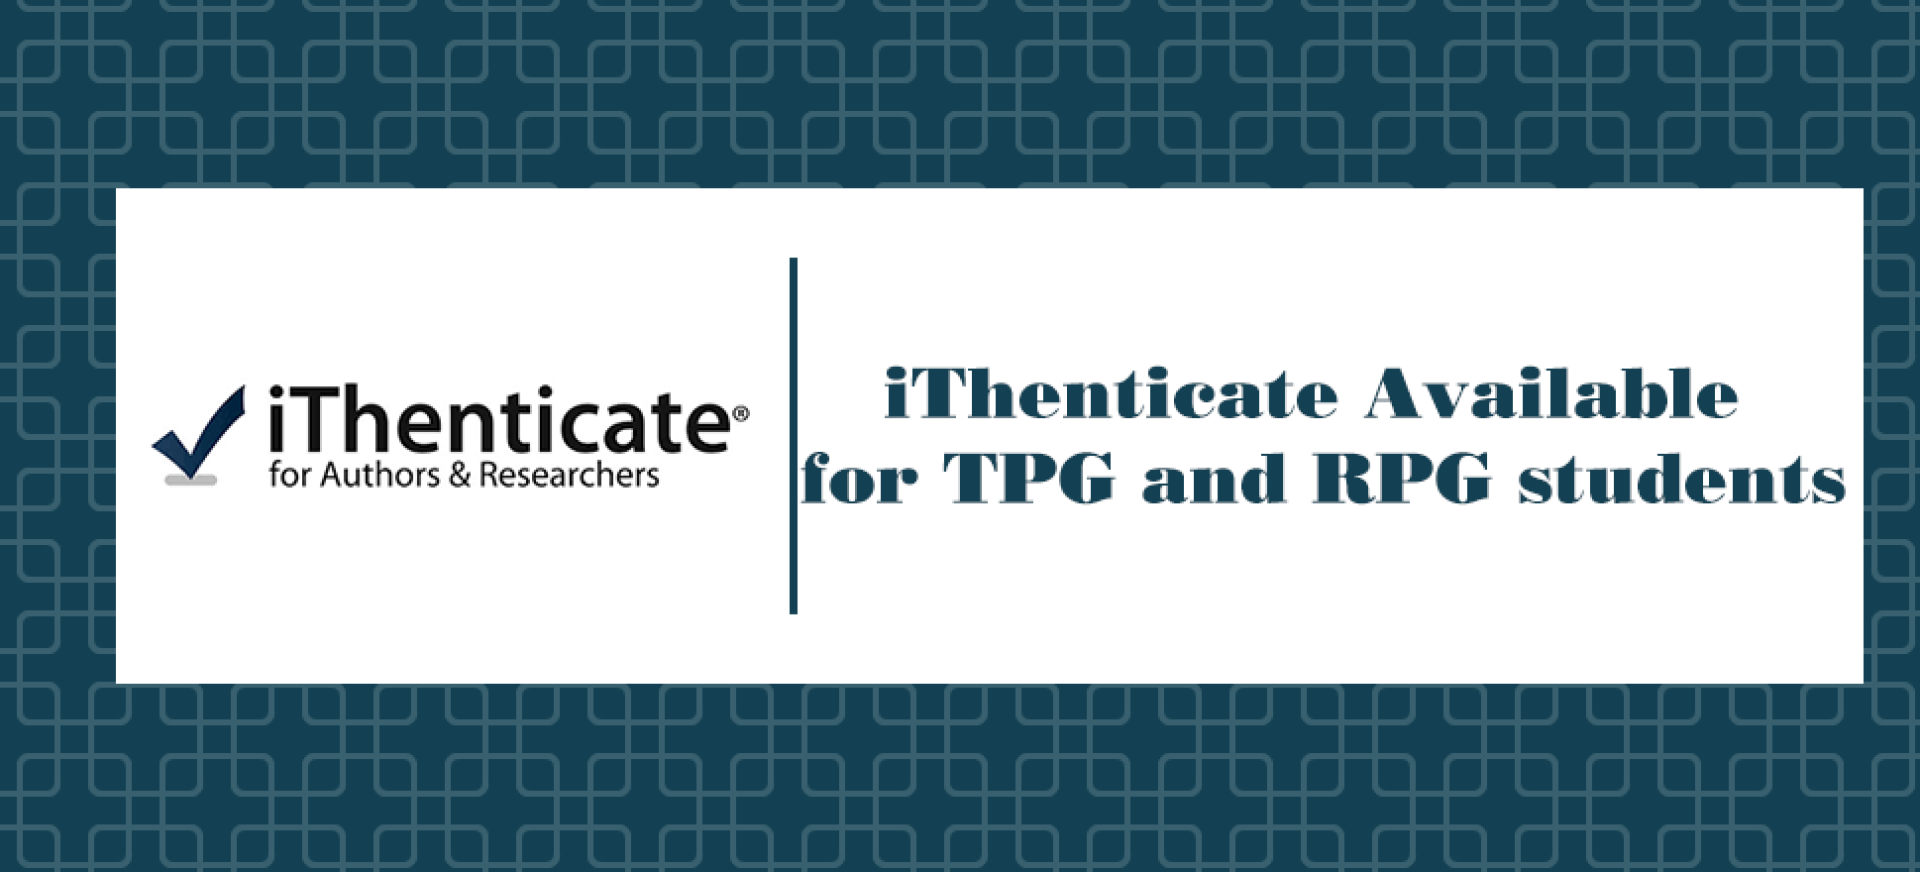 Issue 13 - iThenticate Available for TPG and RPG students